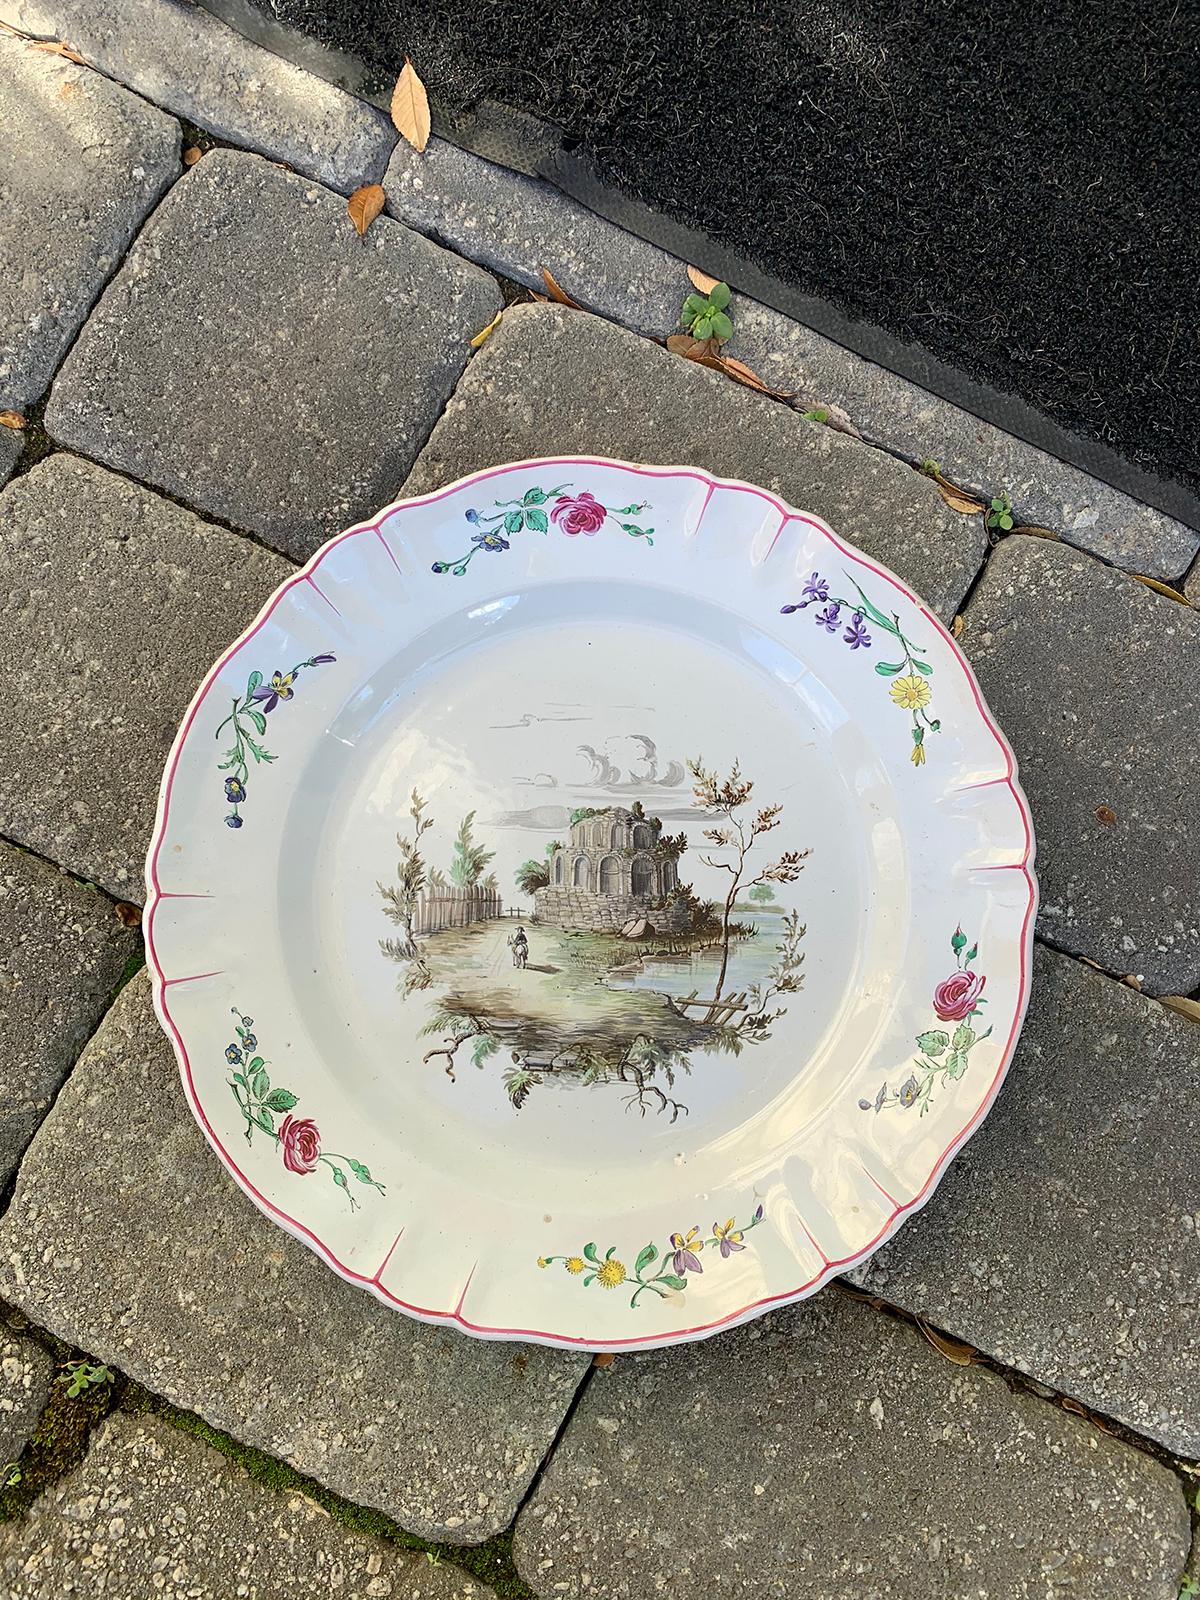 19th century Italian tin glazed white porcelain charger with neoclassical scene and floral border. Unmarked.